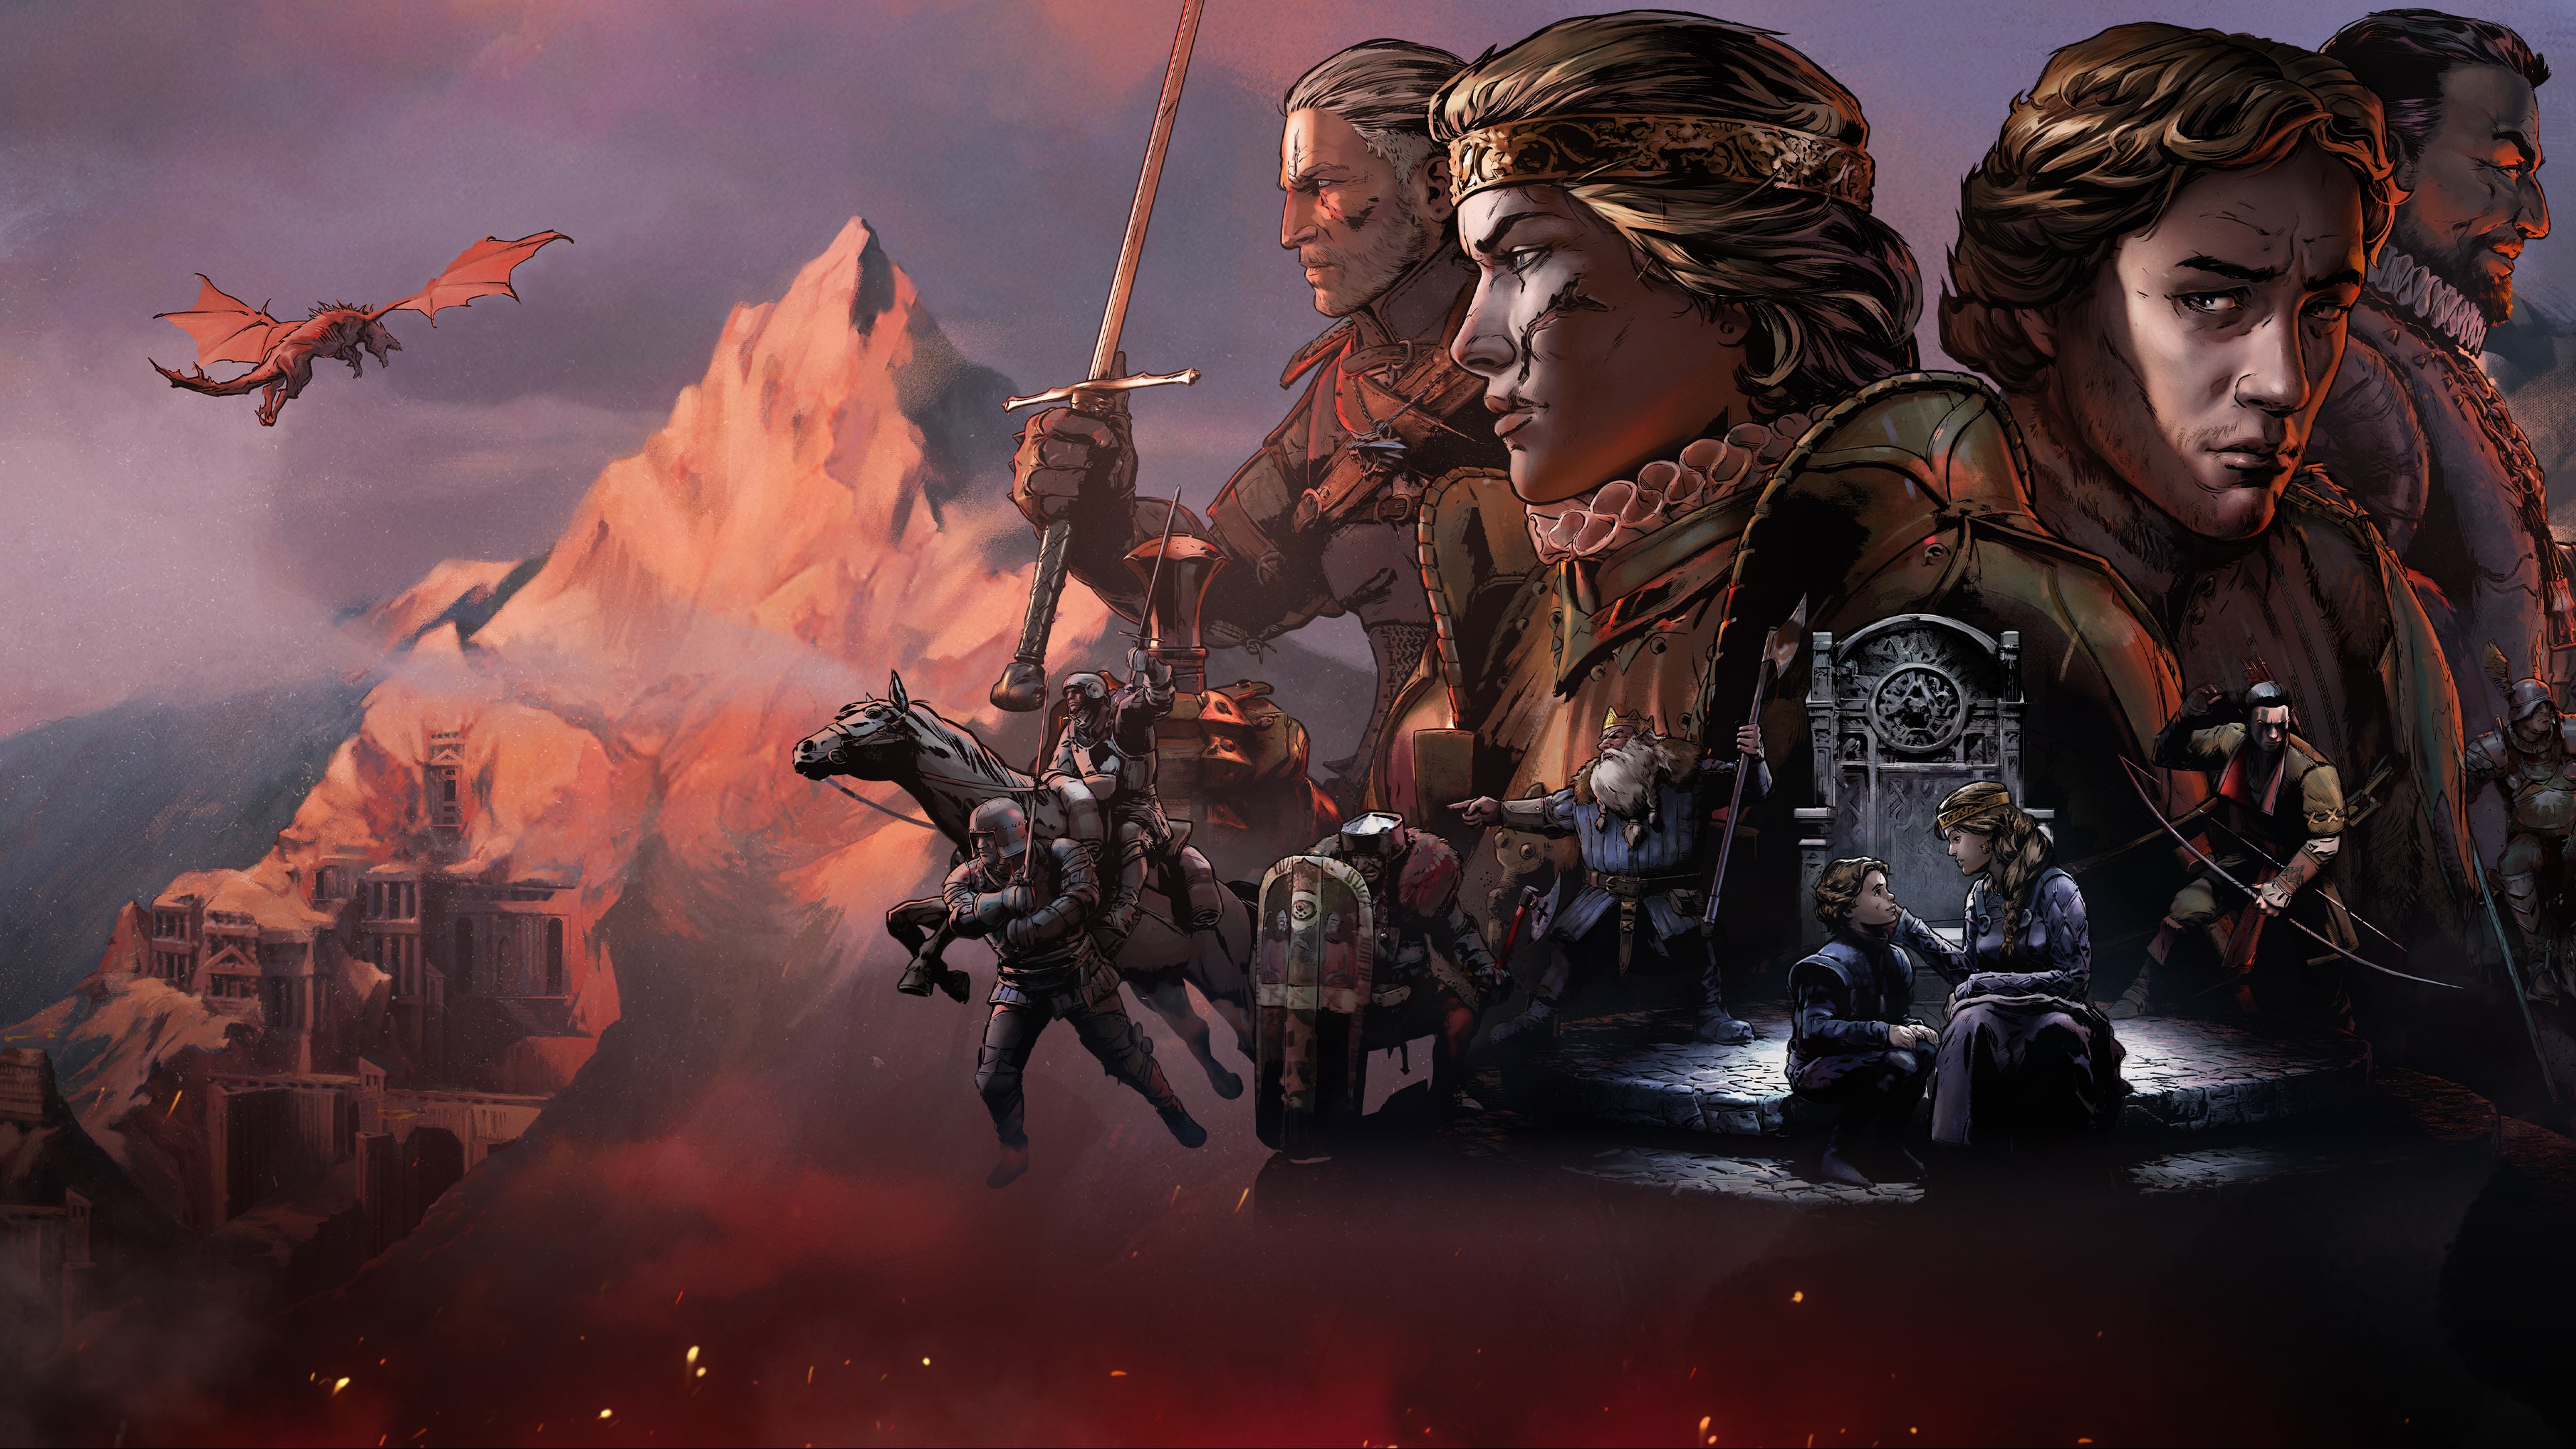 Min Bryde igennem Traditionel Thronebreaker: The Witcher Tales